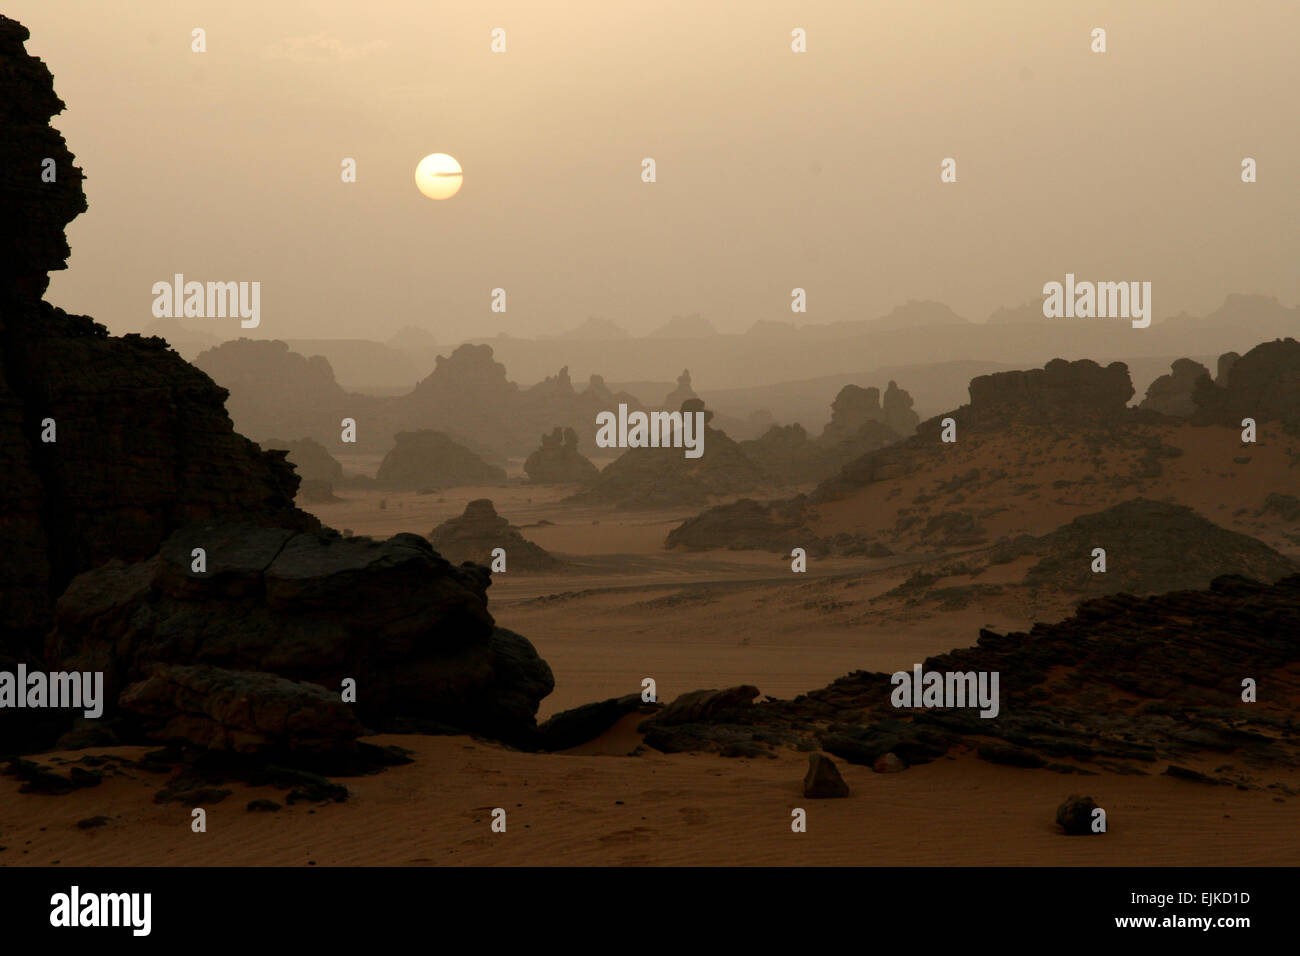 Sunset over the Acacus Mountains in the Libyan Sahara Stock Photo